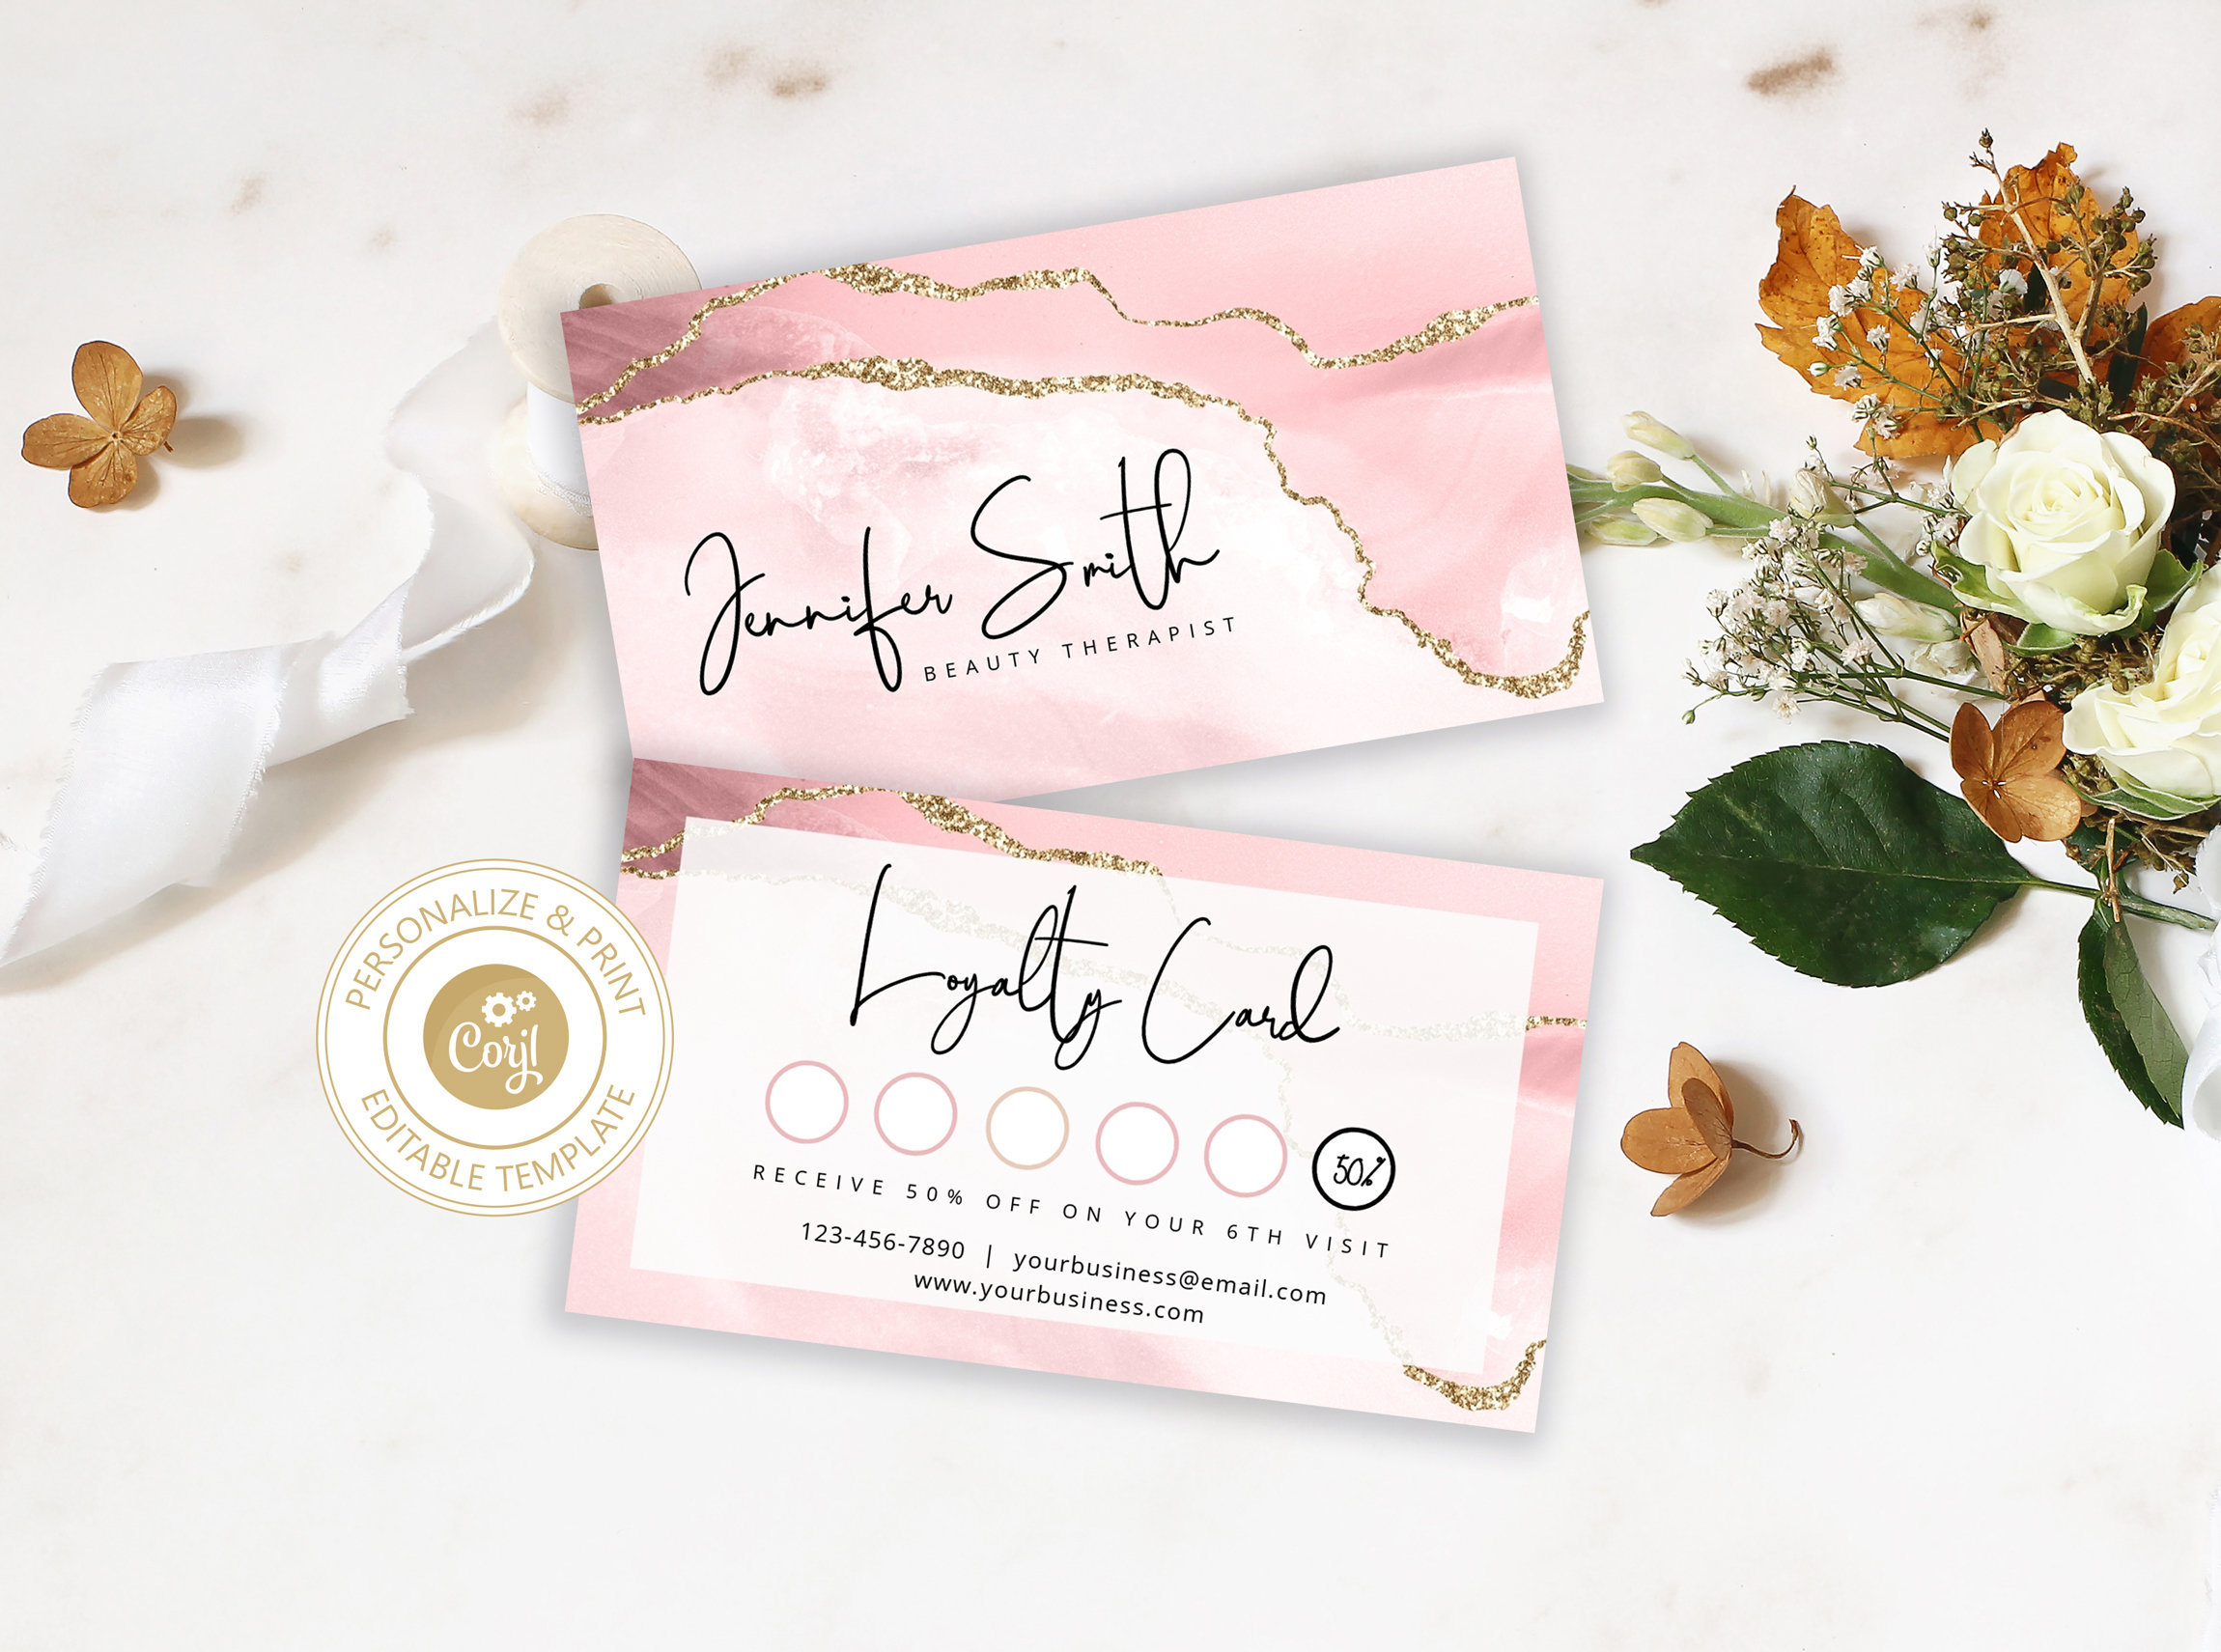 Printable Loyalty Cards Free Thirty One